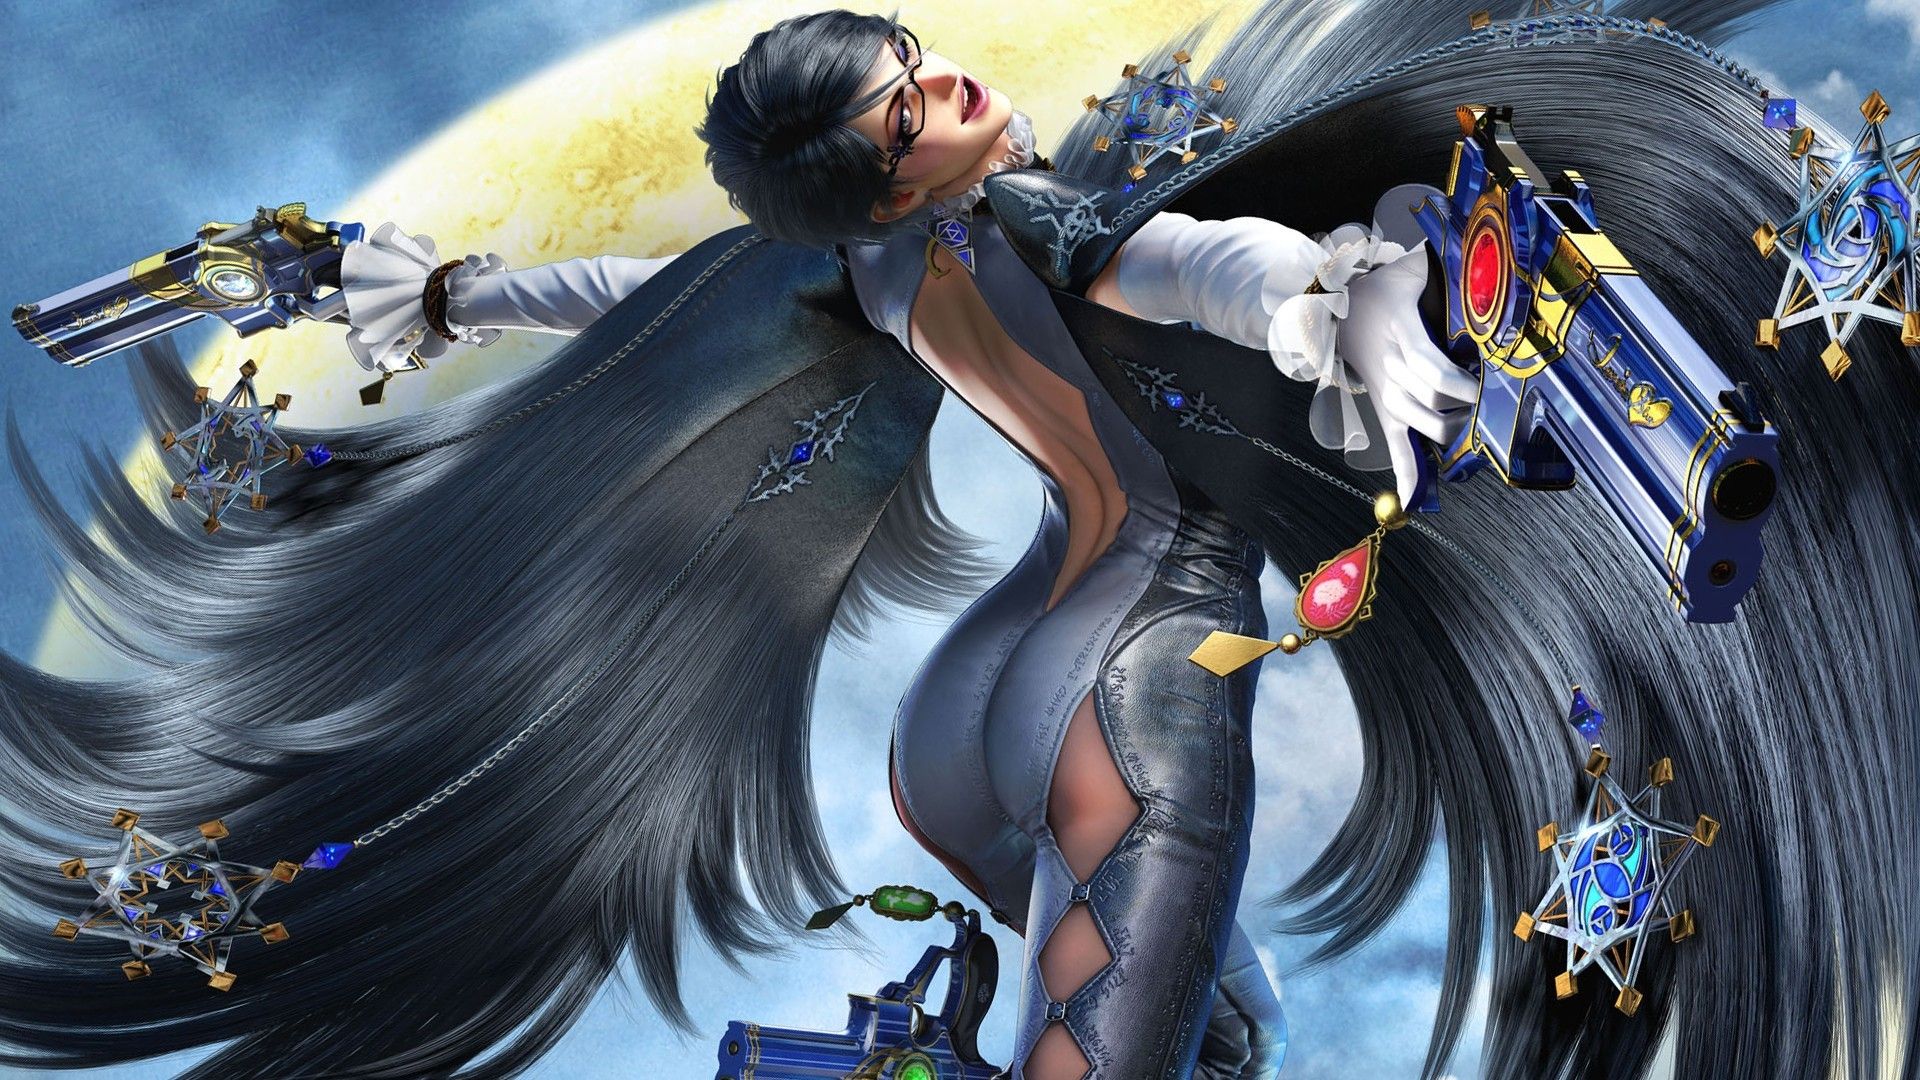 Bayonetta 3 Adds New Trailer Showing Off Tidbits Of Gameplay and Story   BunnyGamingcom